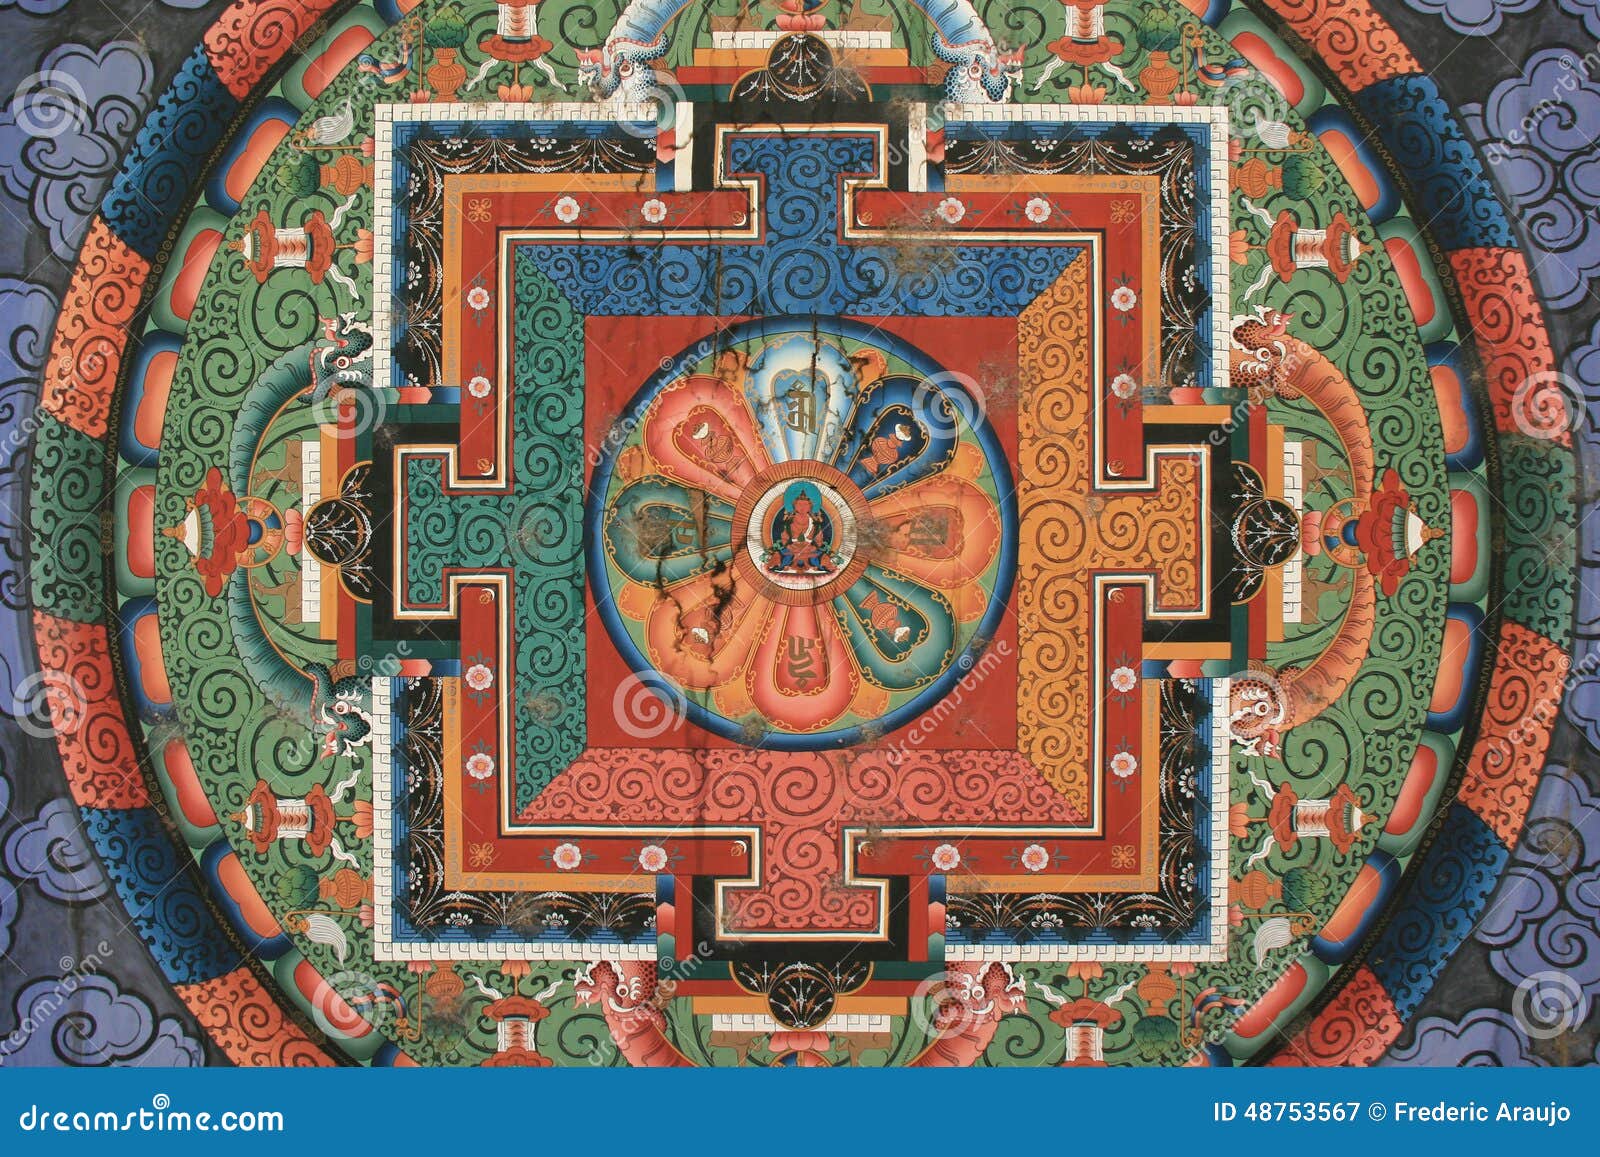 a mandala was painted on the ceiling of the gate of a buddhist temple in thimphu (bhutan)